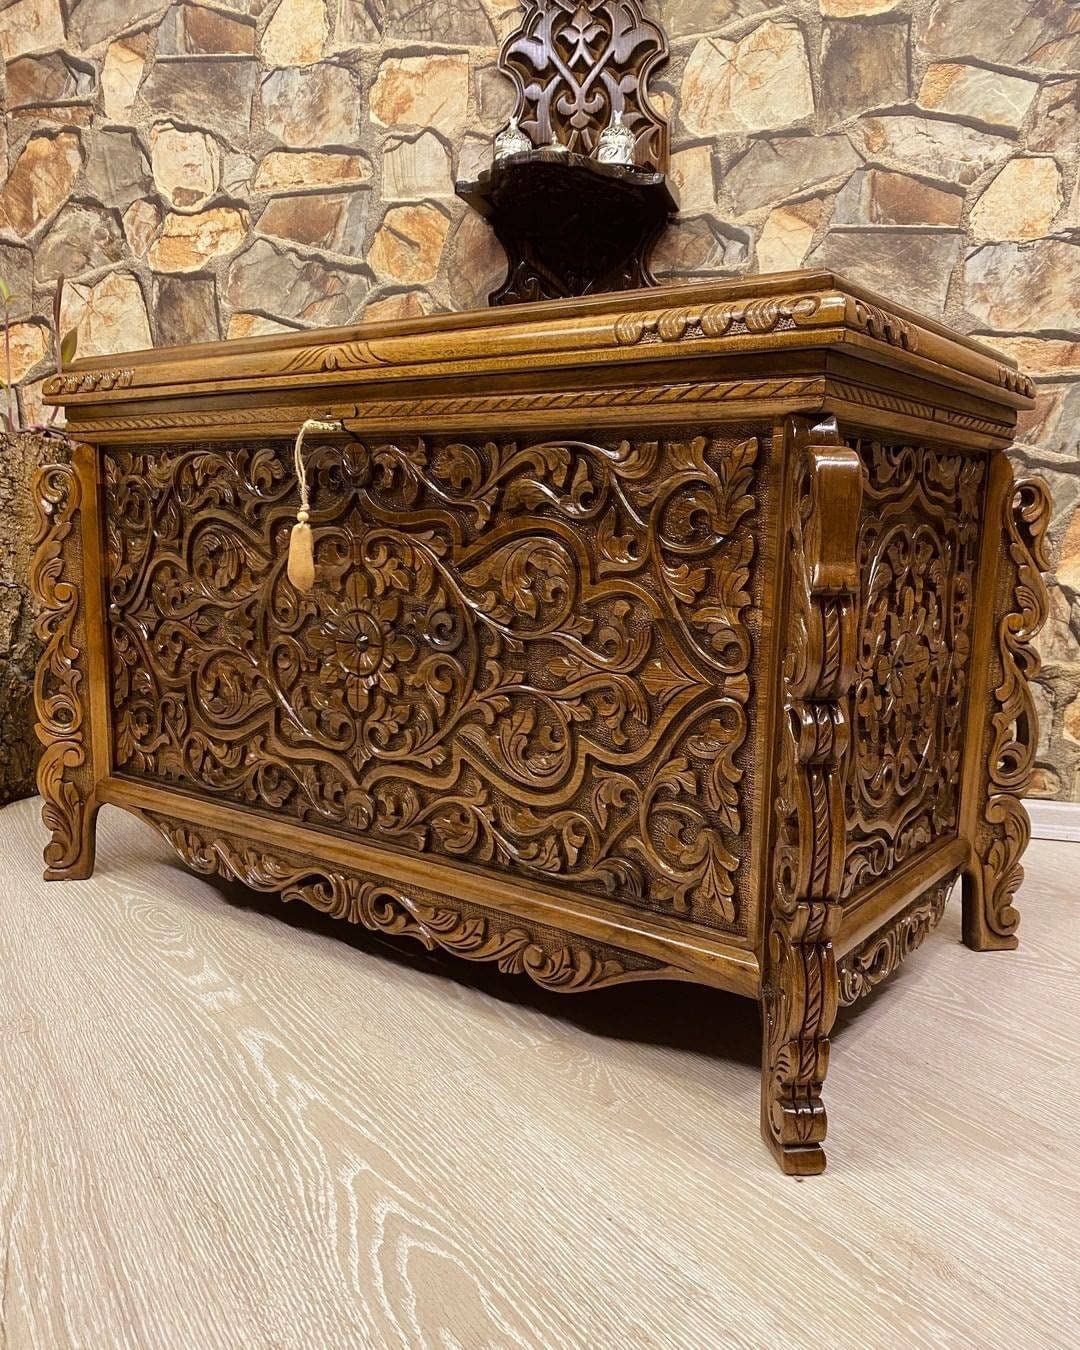 Handmade Walnut Carved Decorative Dowry Chest | Large Wooden Storage Trunk